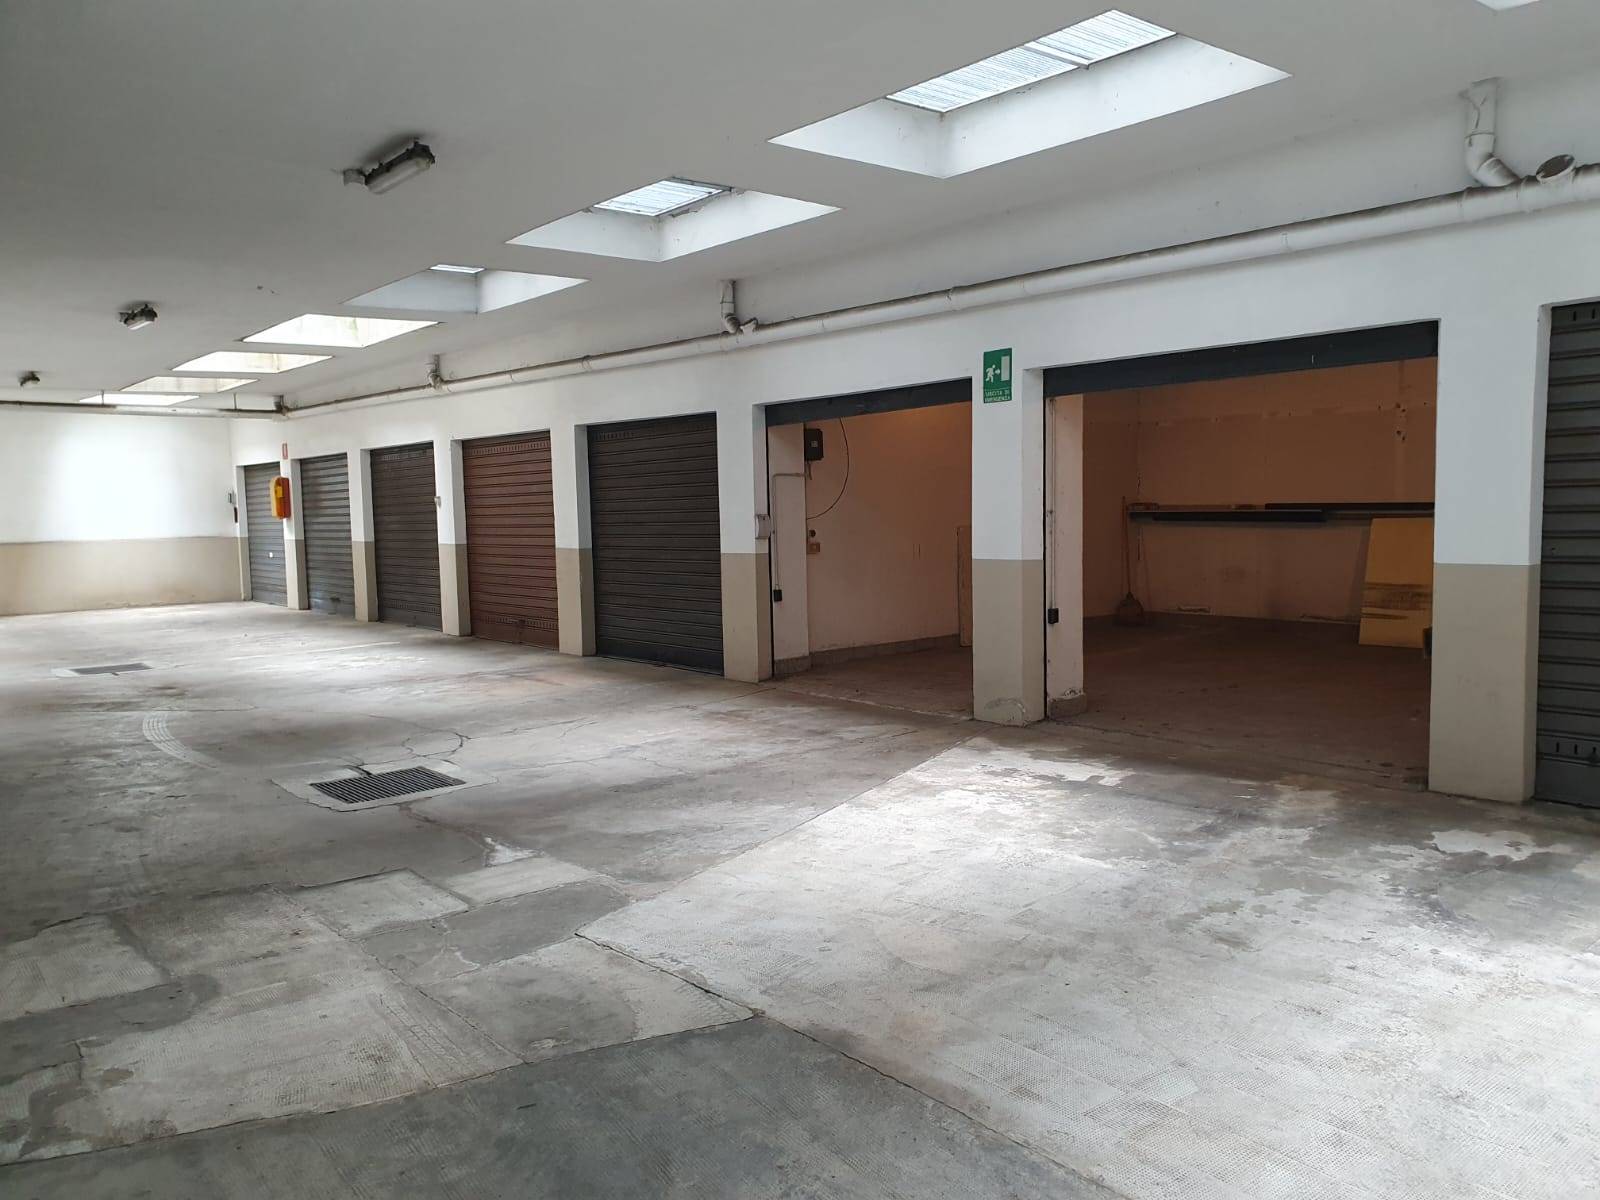 SESTO SAN GIOVANNI, Garage / Parking space for sale of 26 Sq. mt., Energetic class: Not subject, placed at Buried, composed by: 1 Room, Price: € 52,